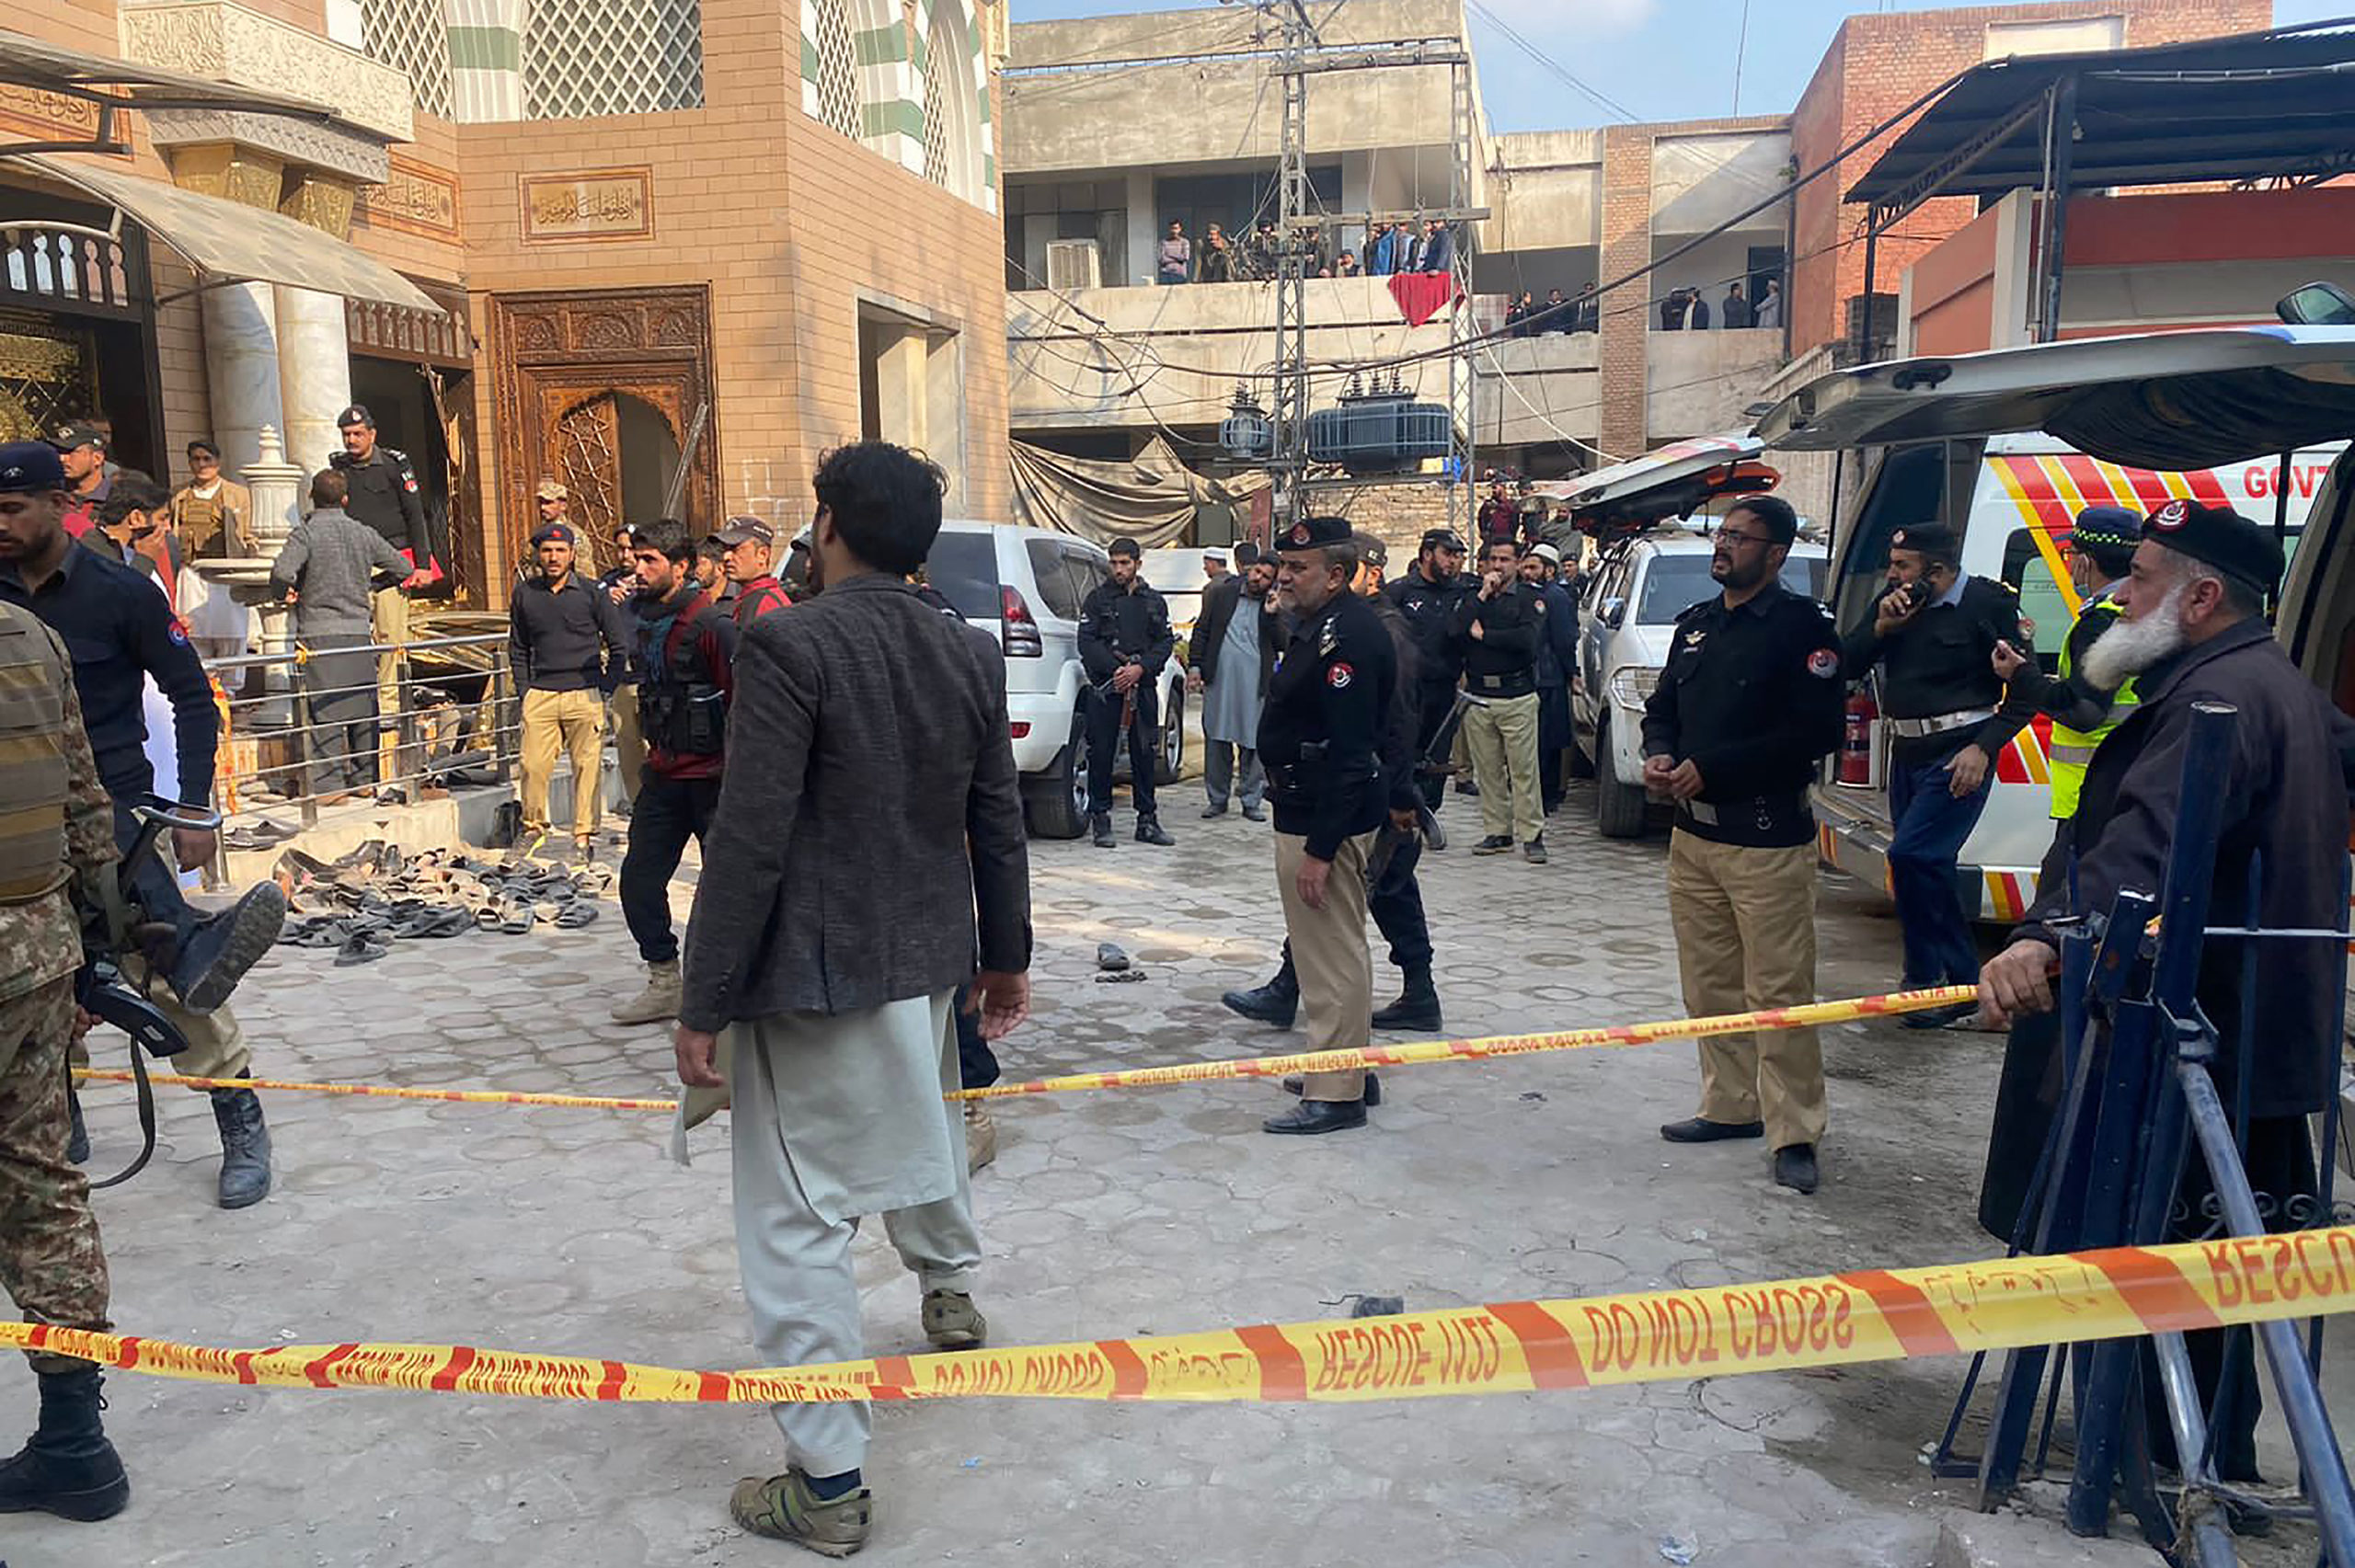 Security personnel cordon off the site of a mosque blast inside the police headquarters in Peshawar on January 30, 2023. - At least 25 people were killed and 120 were injured in a mosque blast at a police headquarters in Pakistan on January 30, a local government official said. (Photo by Maaz ALI / AFP) (Photo by MAAZ ALI/AFP via Getty Images)